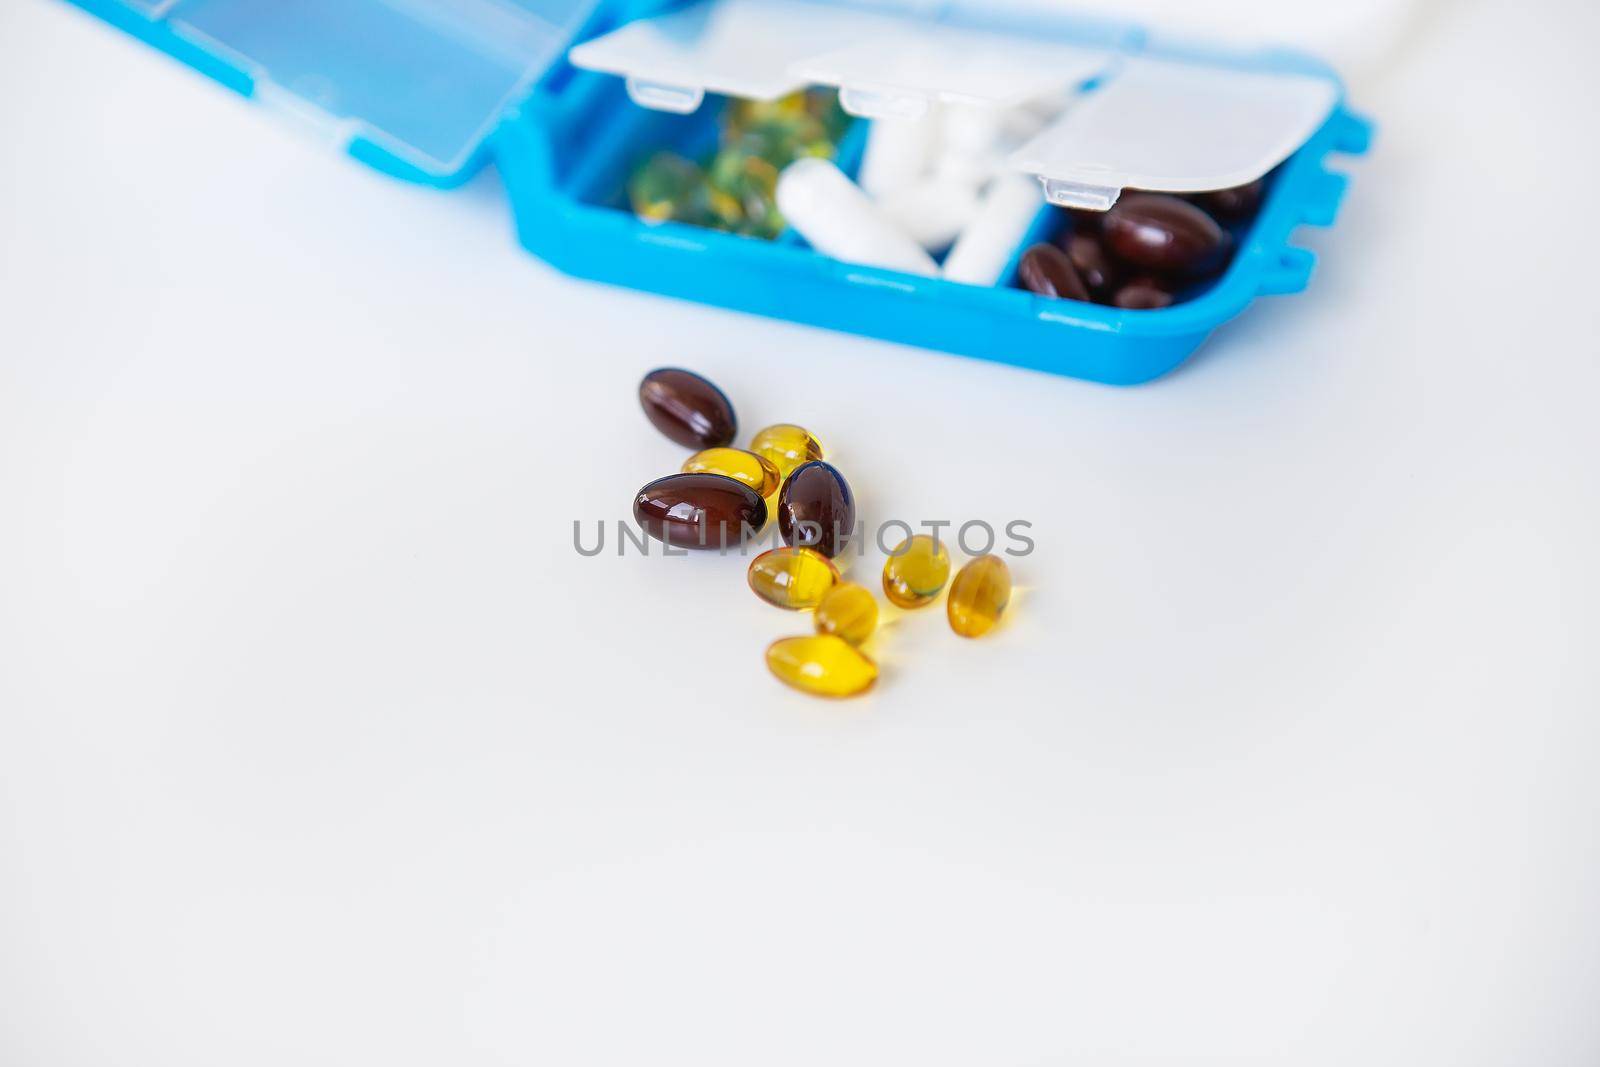 Pouring pills and capsules on a white background close-up. Top view with copy space. Medicine concept. by sfinks